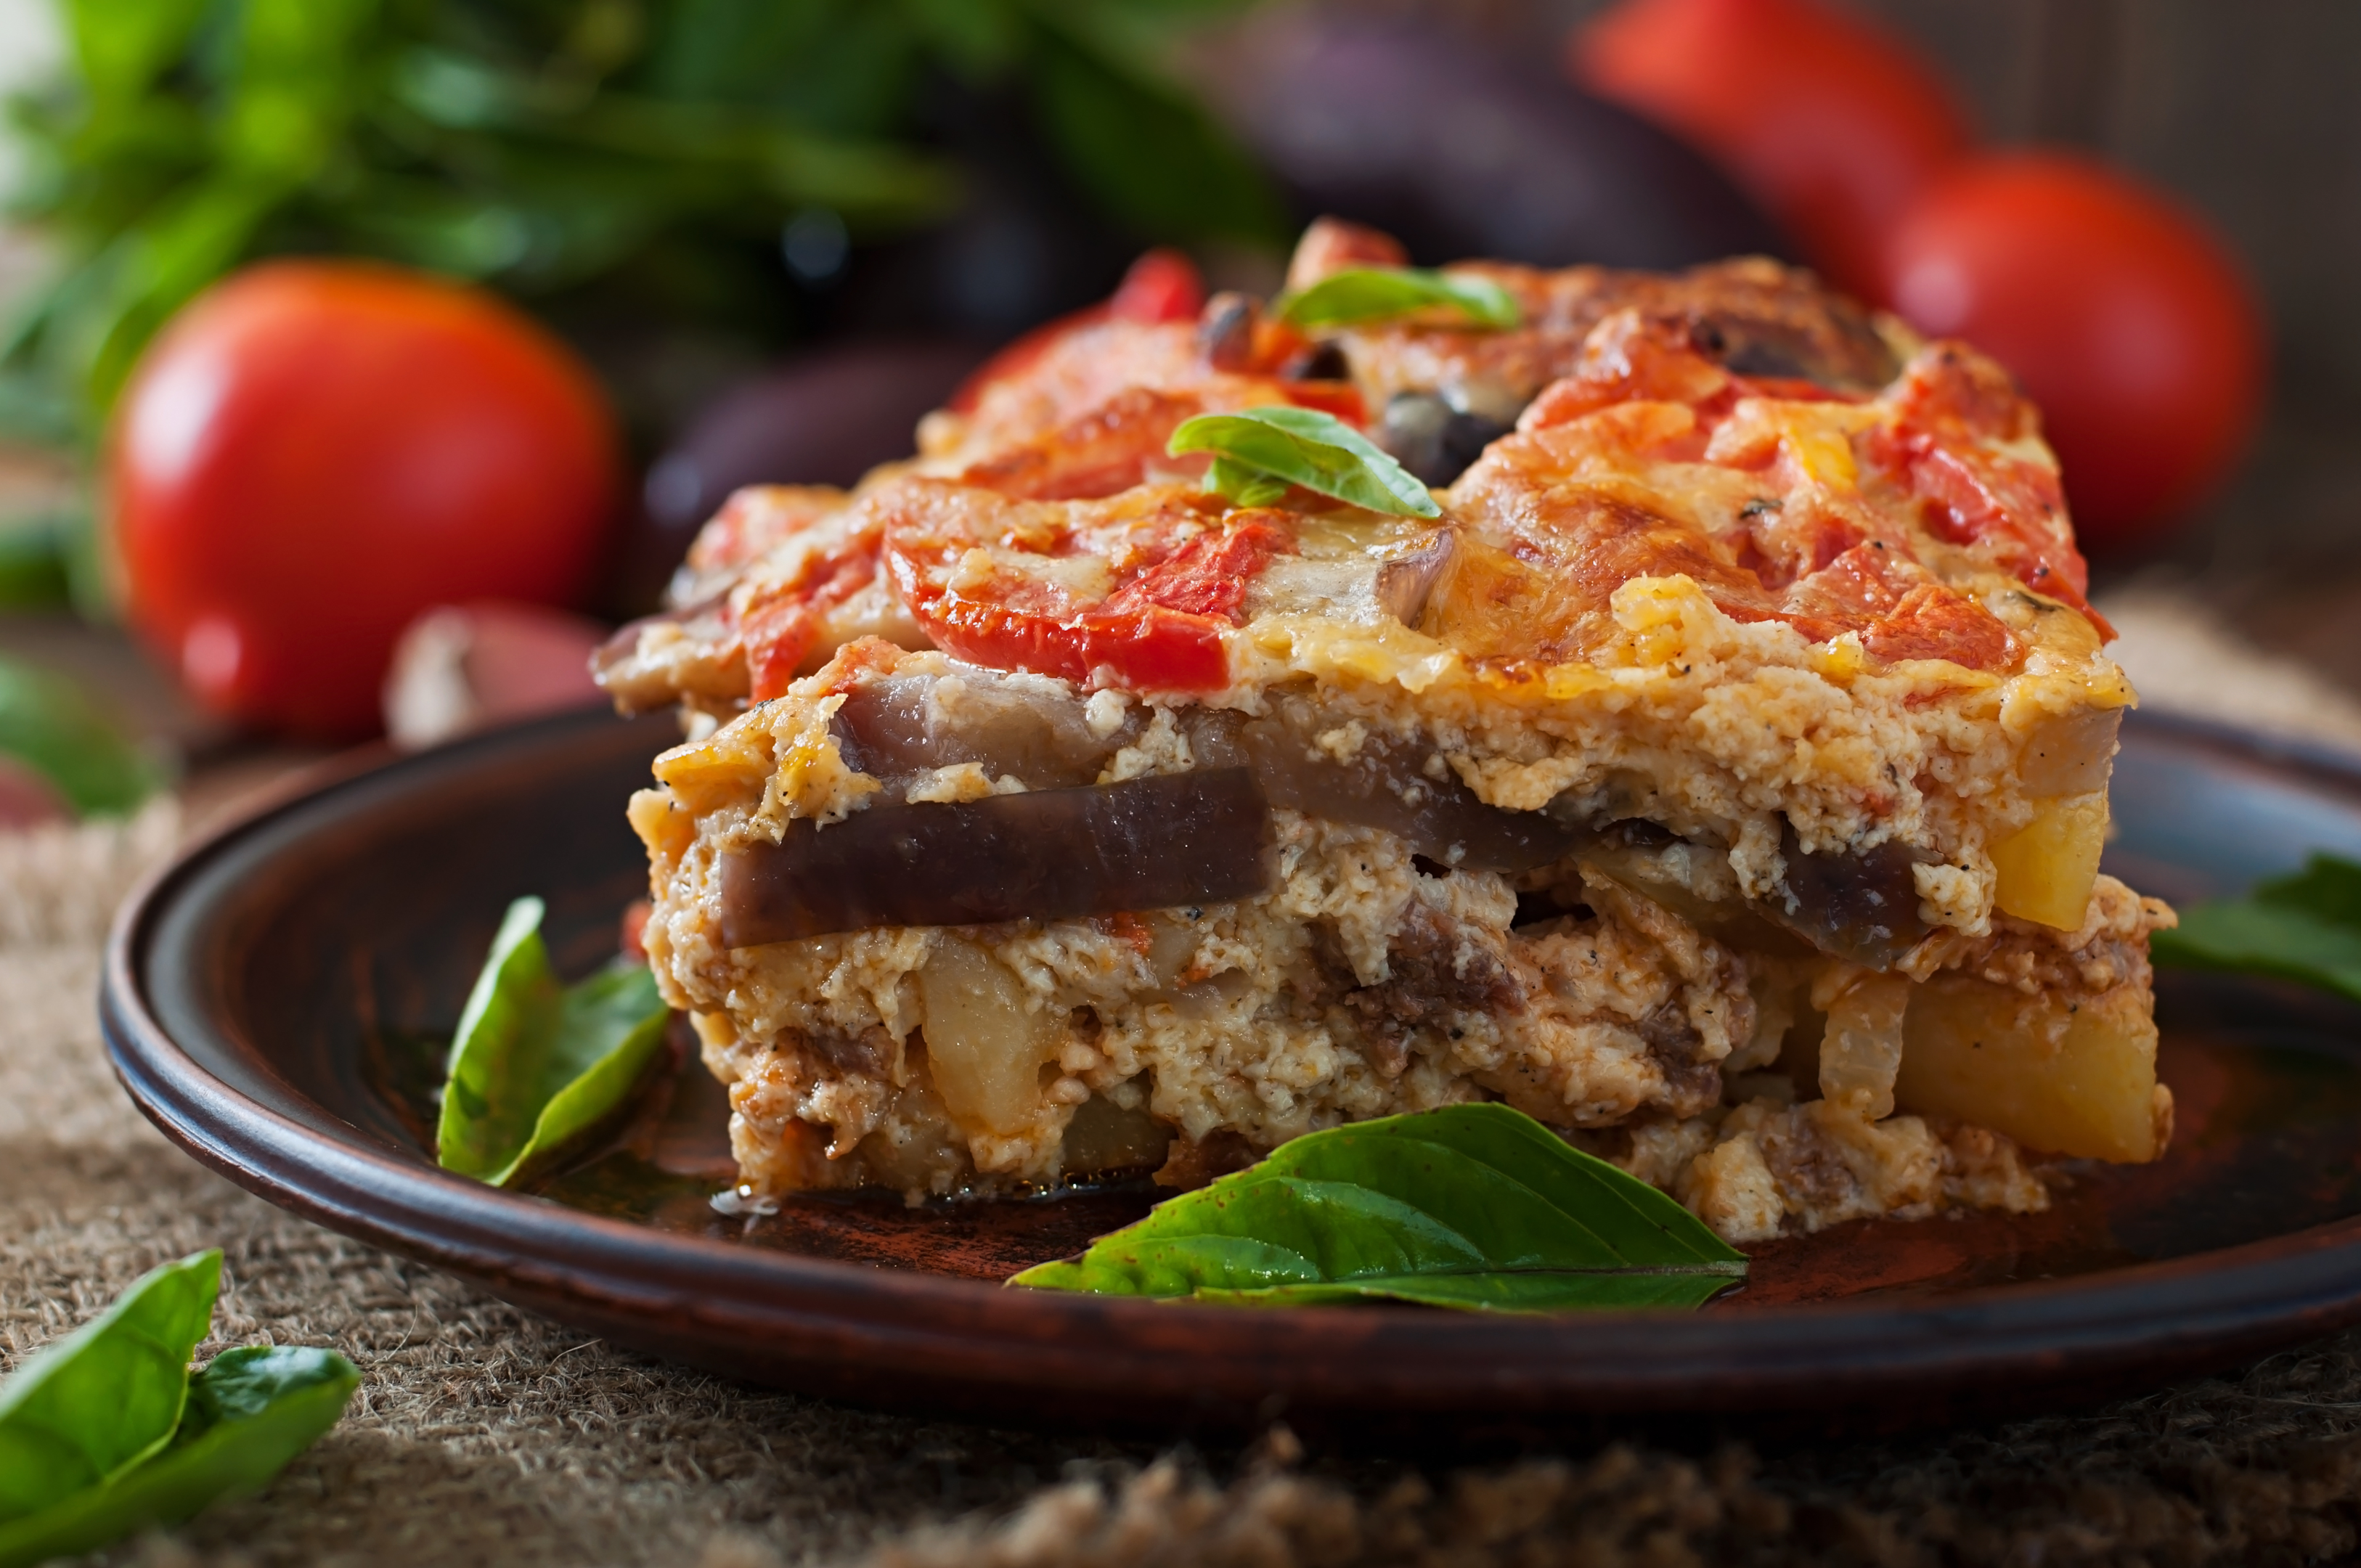 Are you looking for a wonderful recipe for a traditional Moussaka or Pastitsio? Or you needs some quick and easy ideas for leftover lamb?